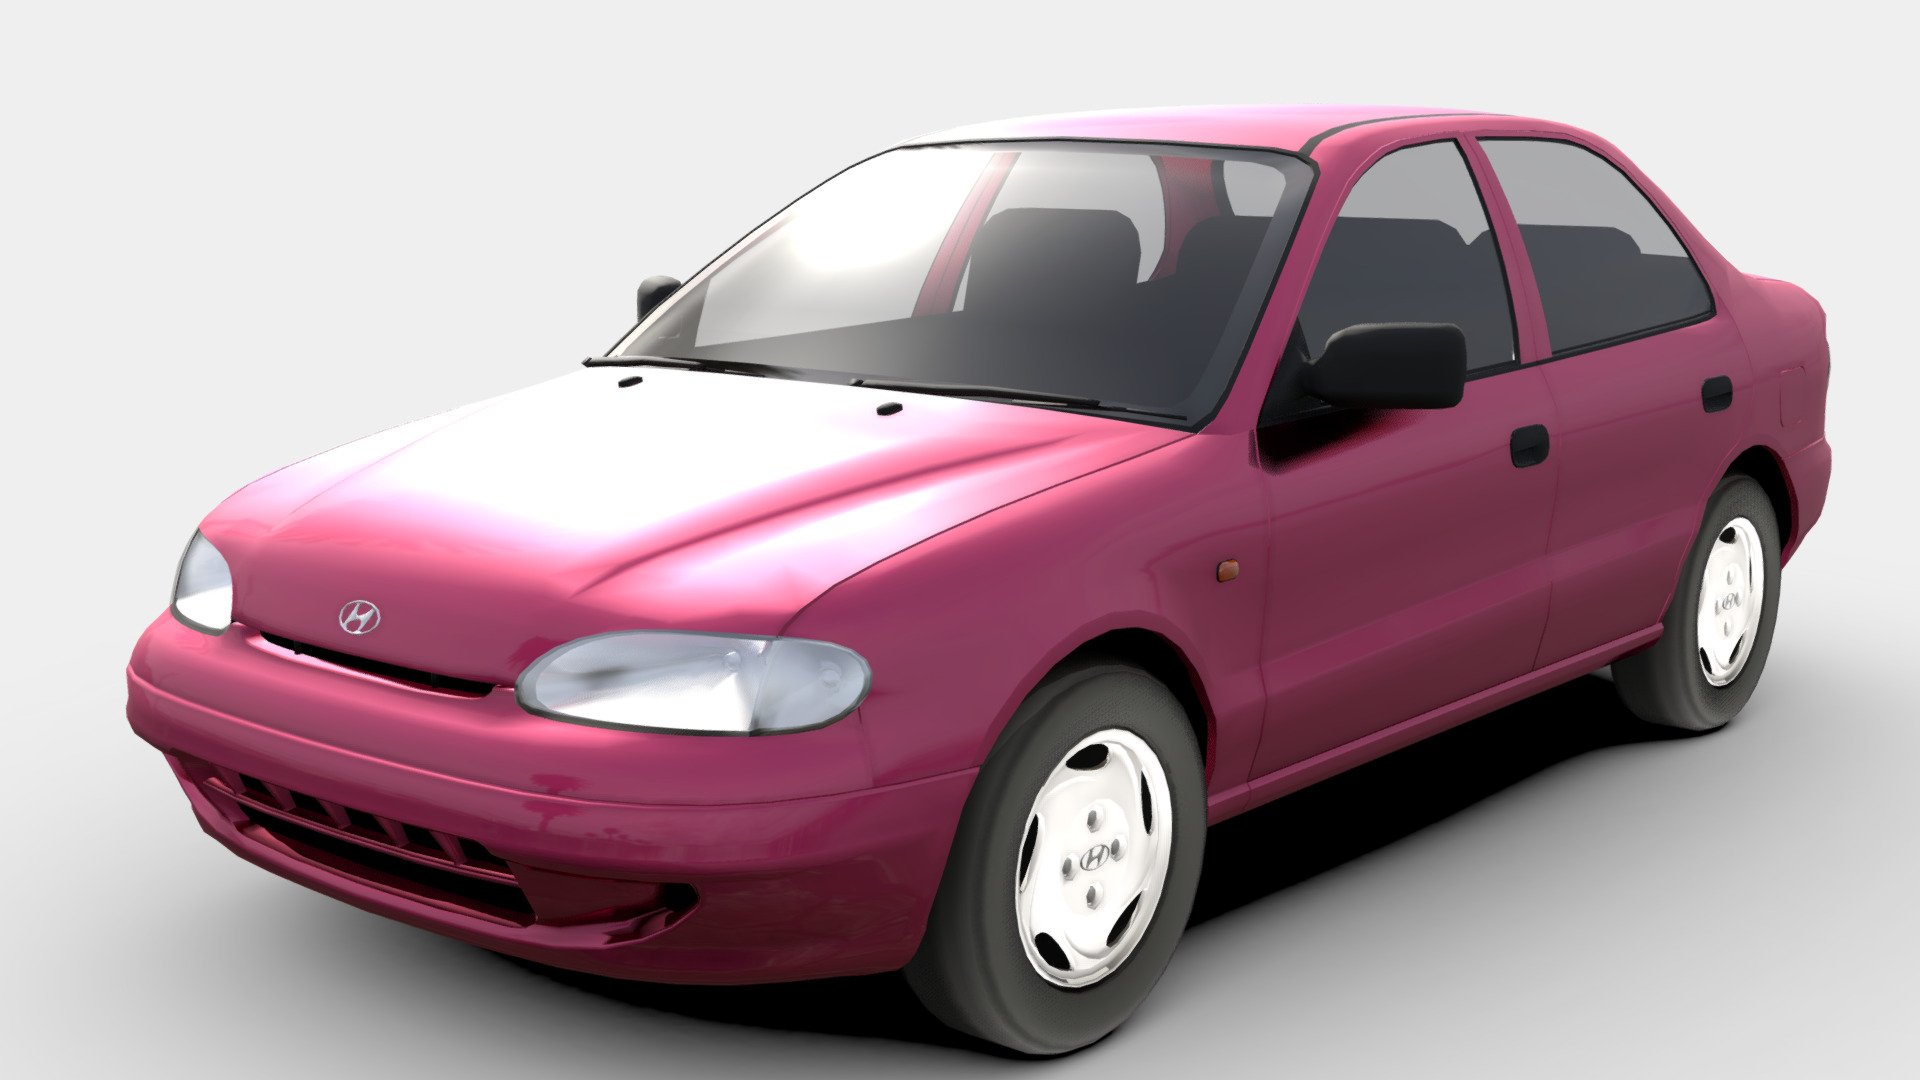 The ultimate backround car, the ultimate beater, the ultimate shitbox. Here is the 1994 Hyundai Accent 3d model